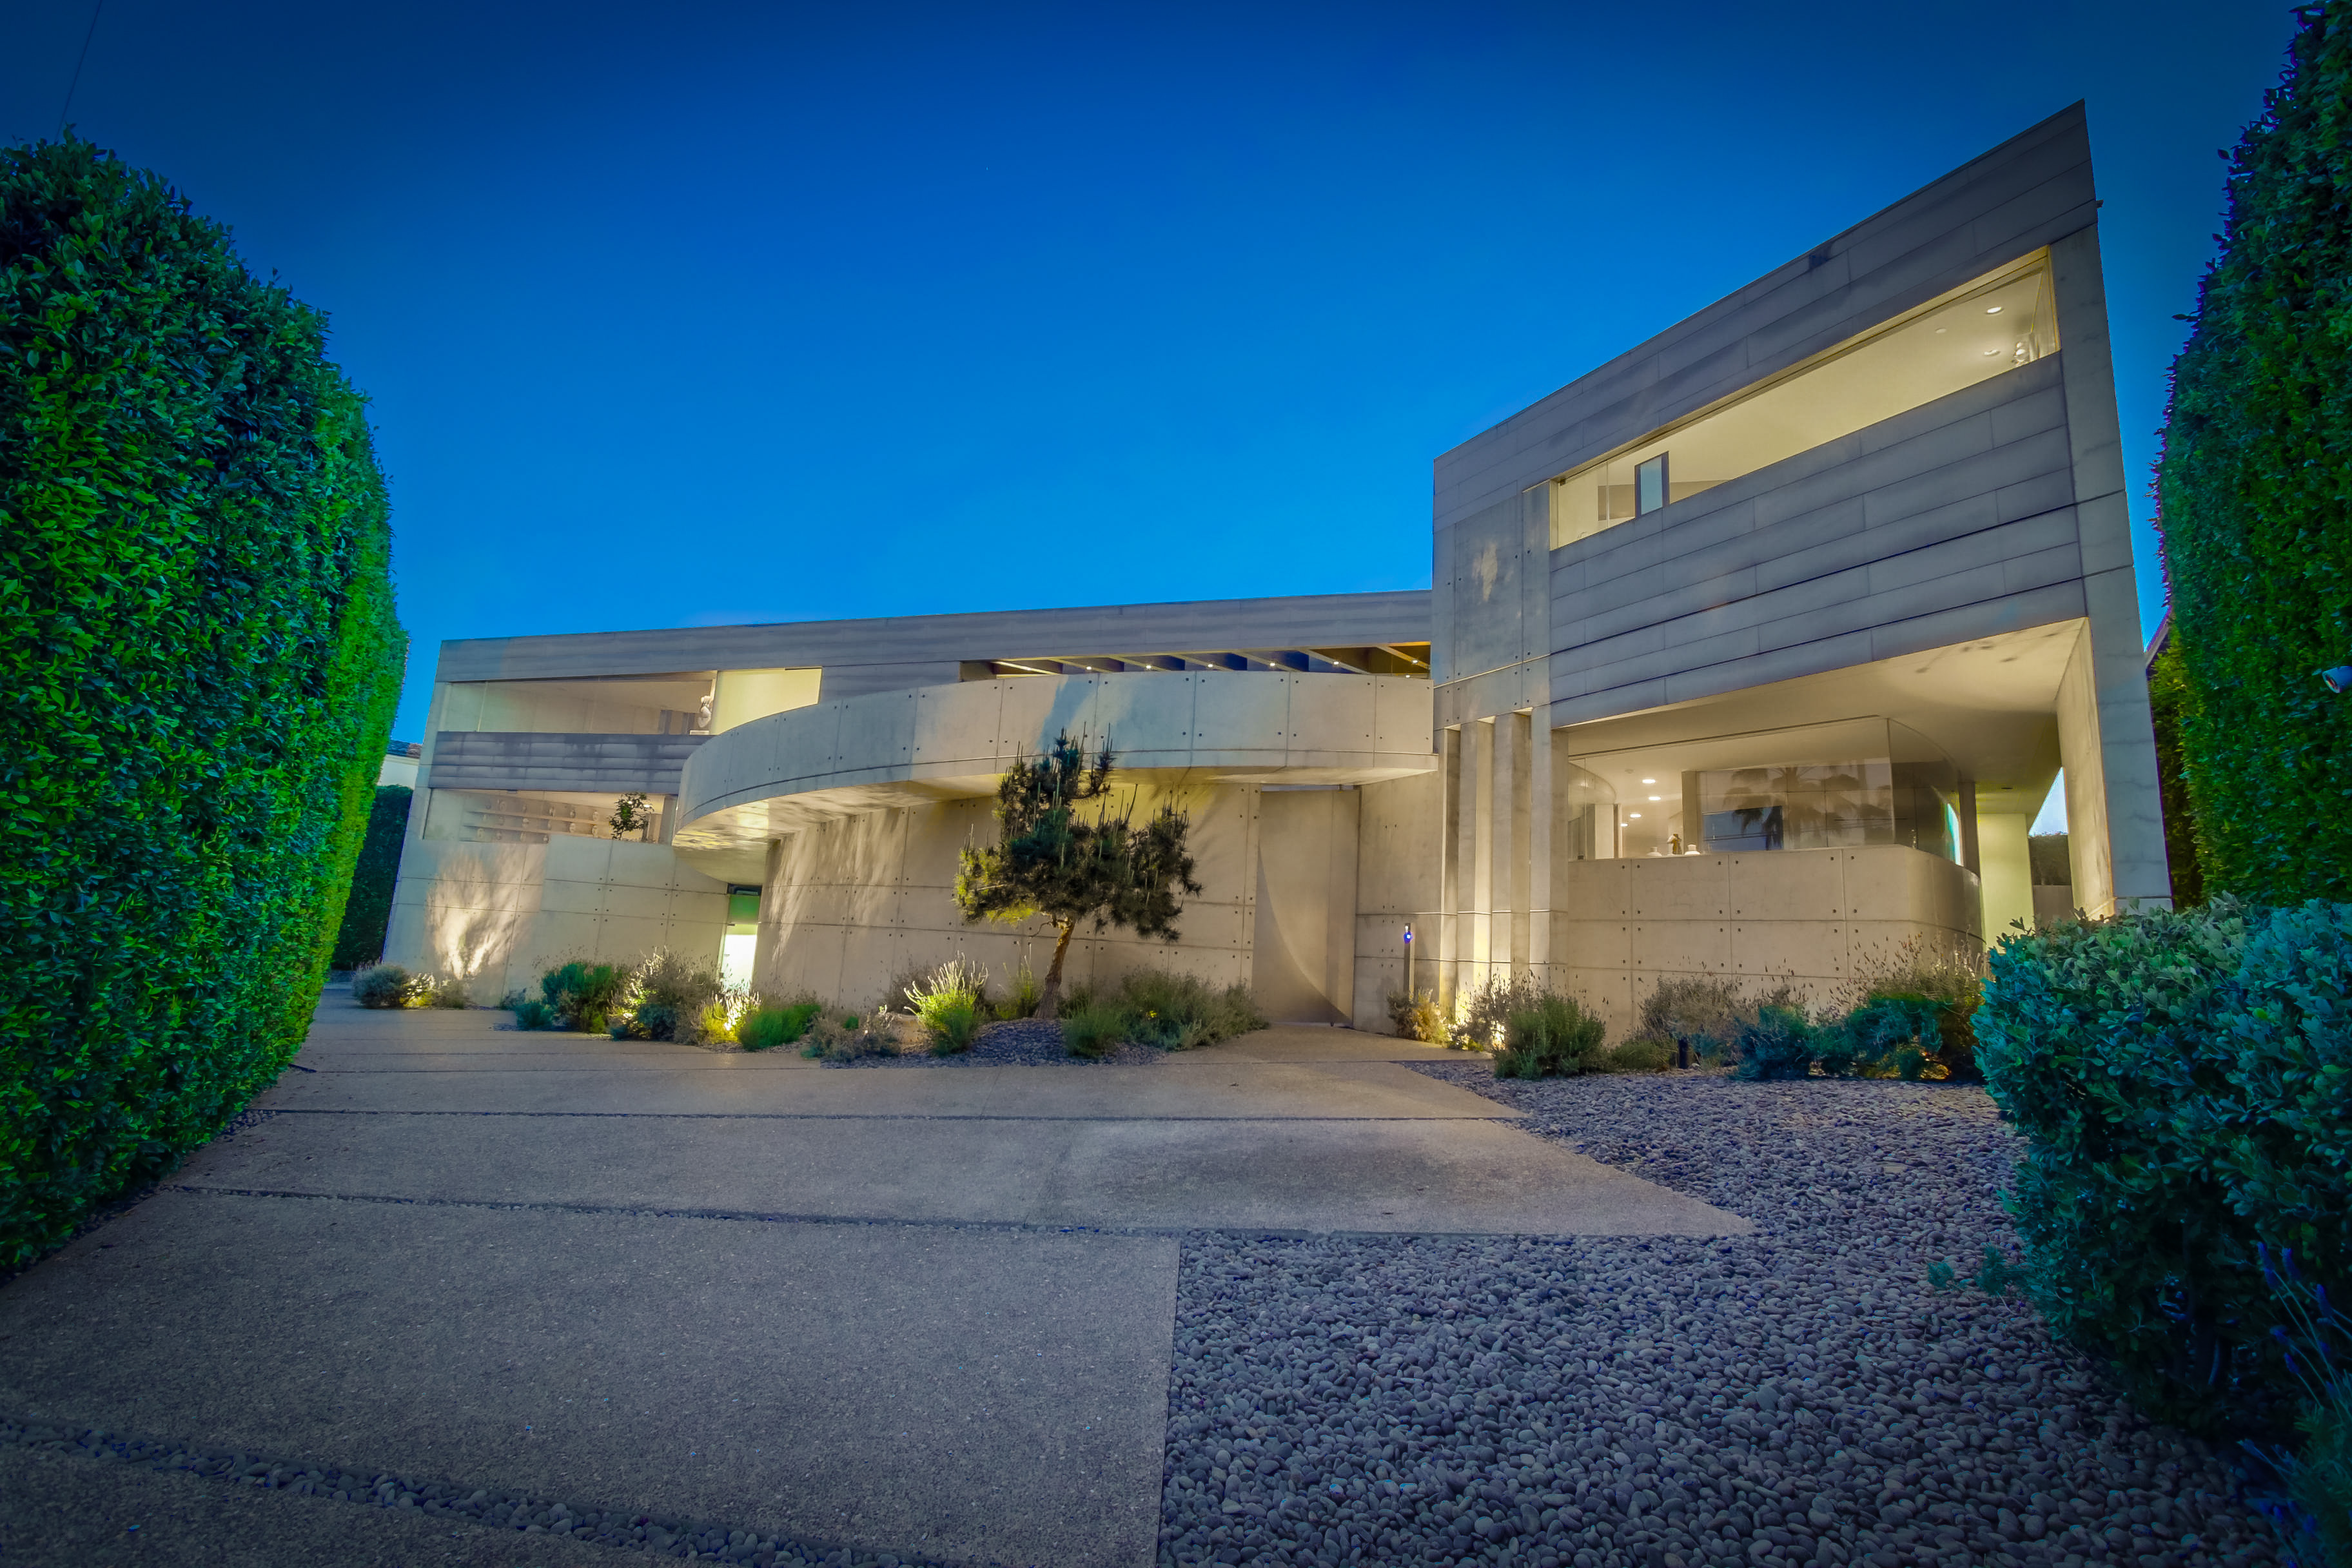 Look inside this futuristic oceanfront mansion just sold in Southern California